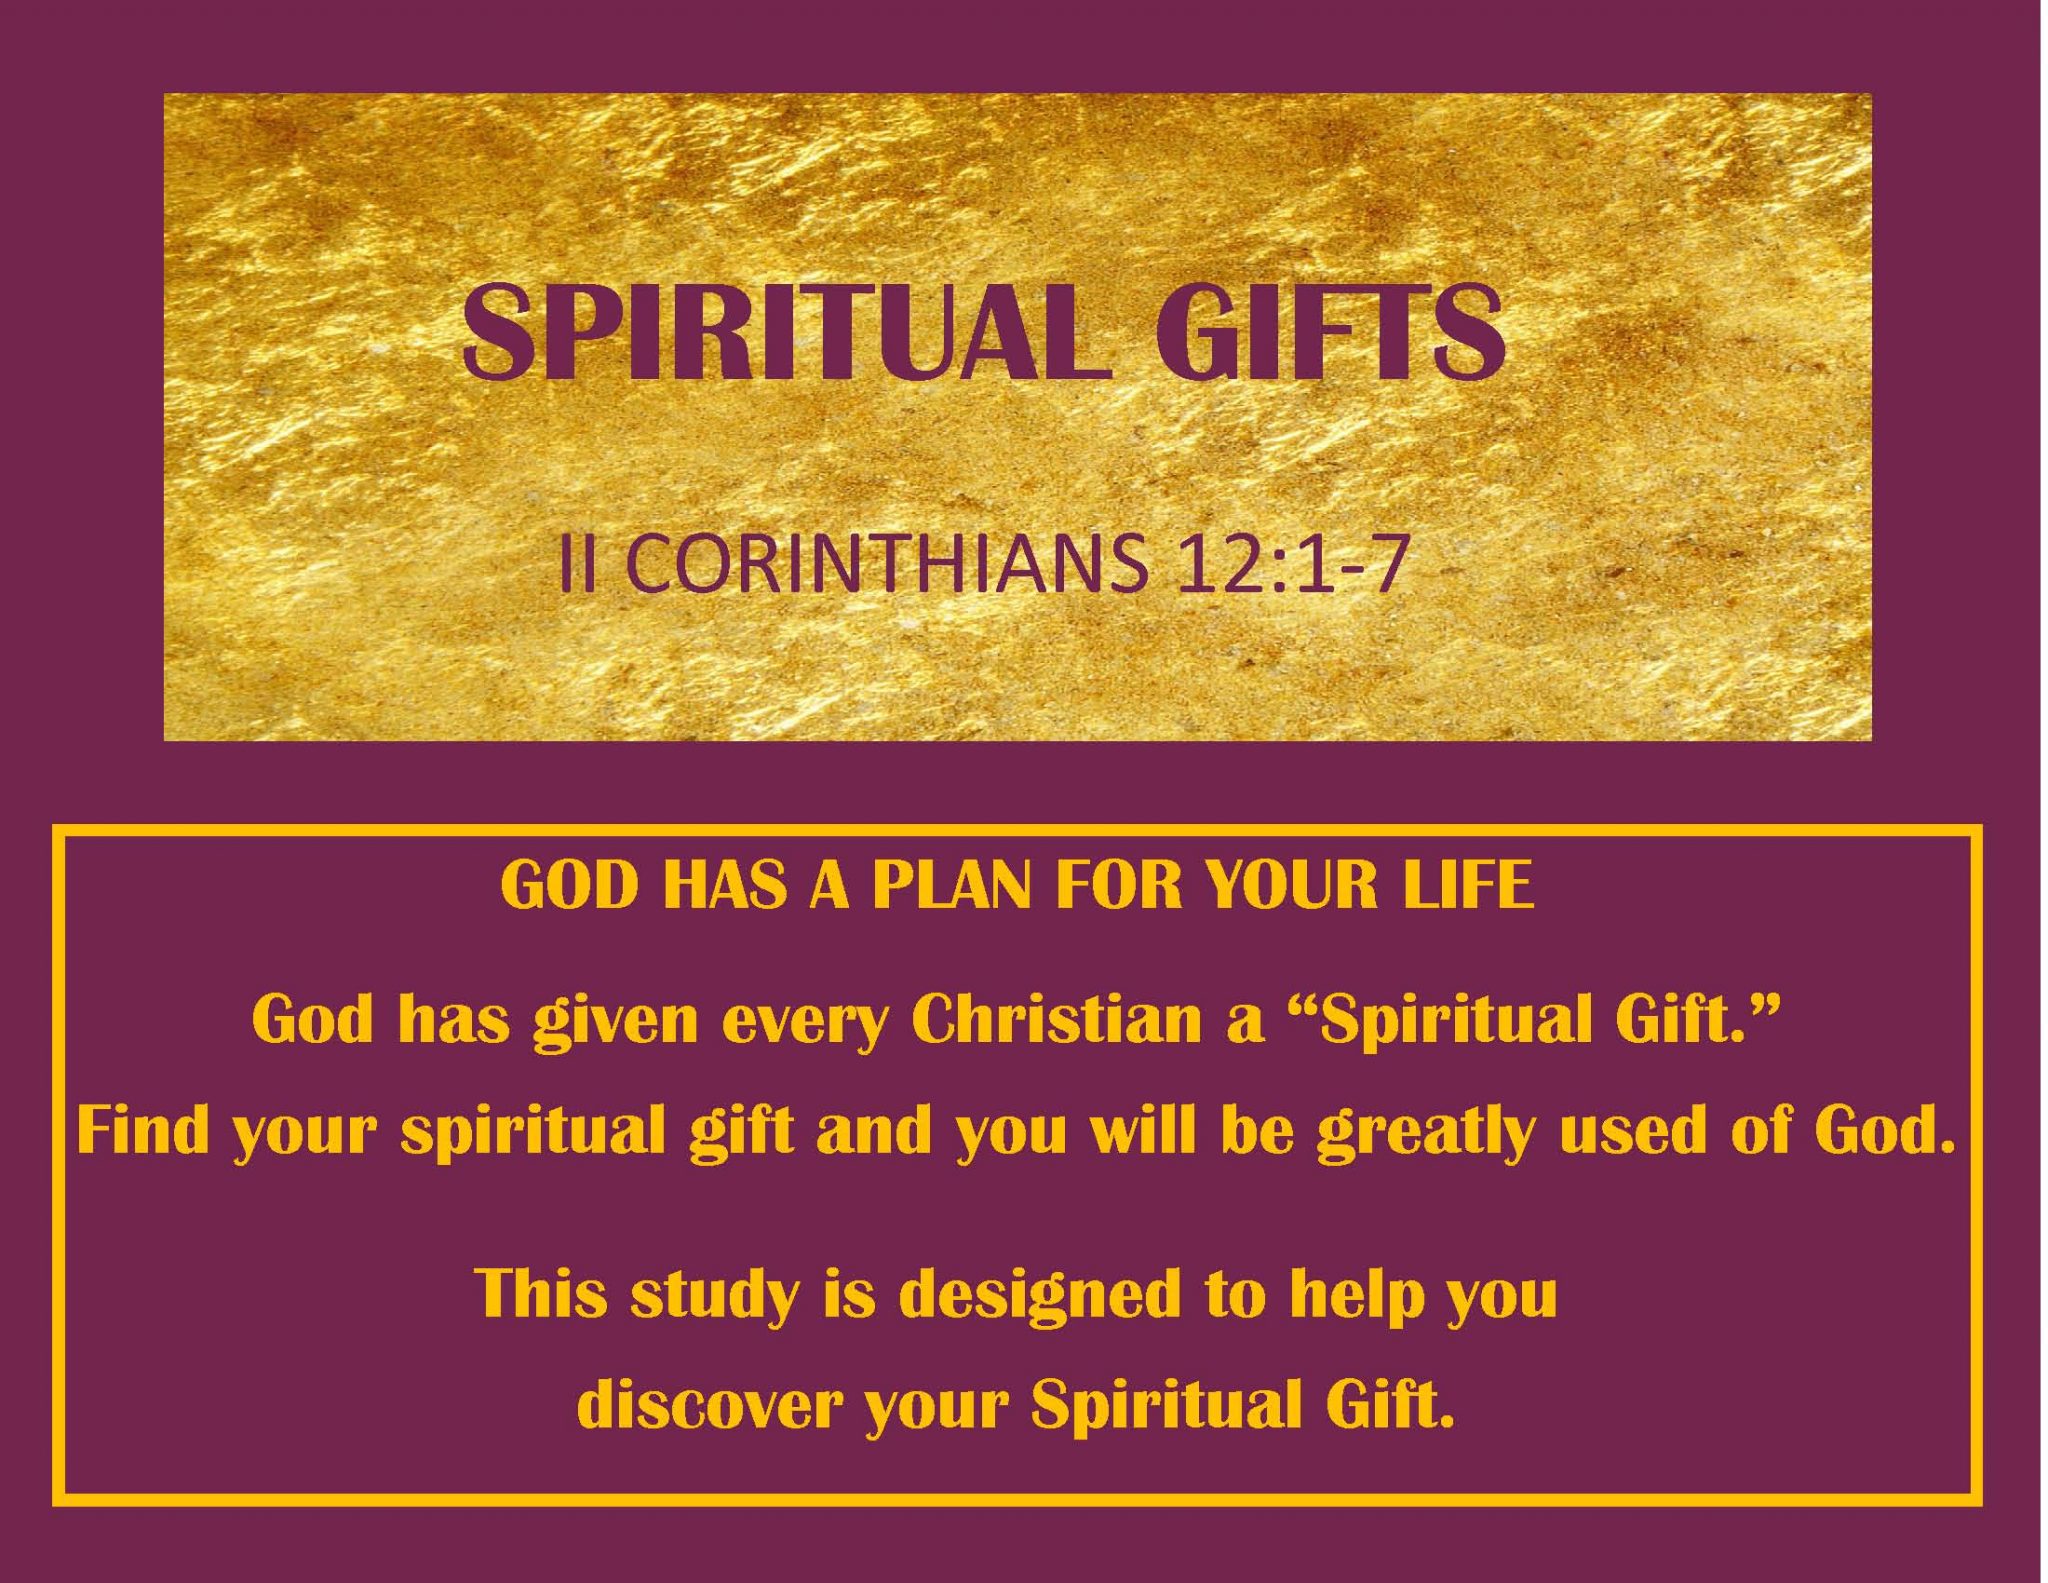 spiritual-gifts-9-lessons-fundamental-baptist-world-wide-mission